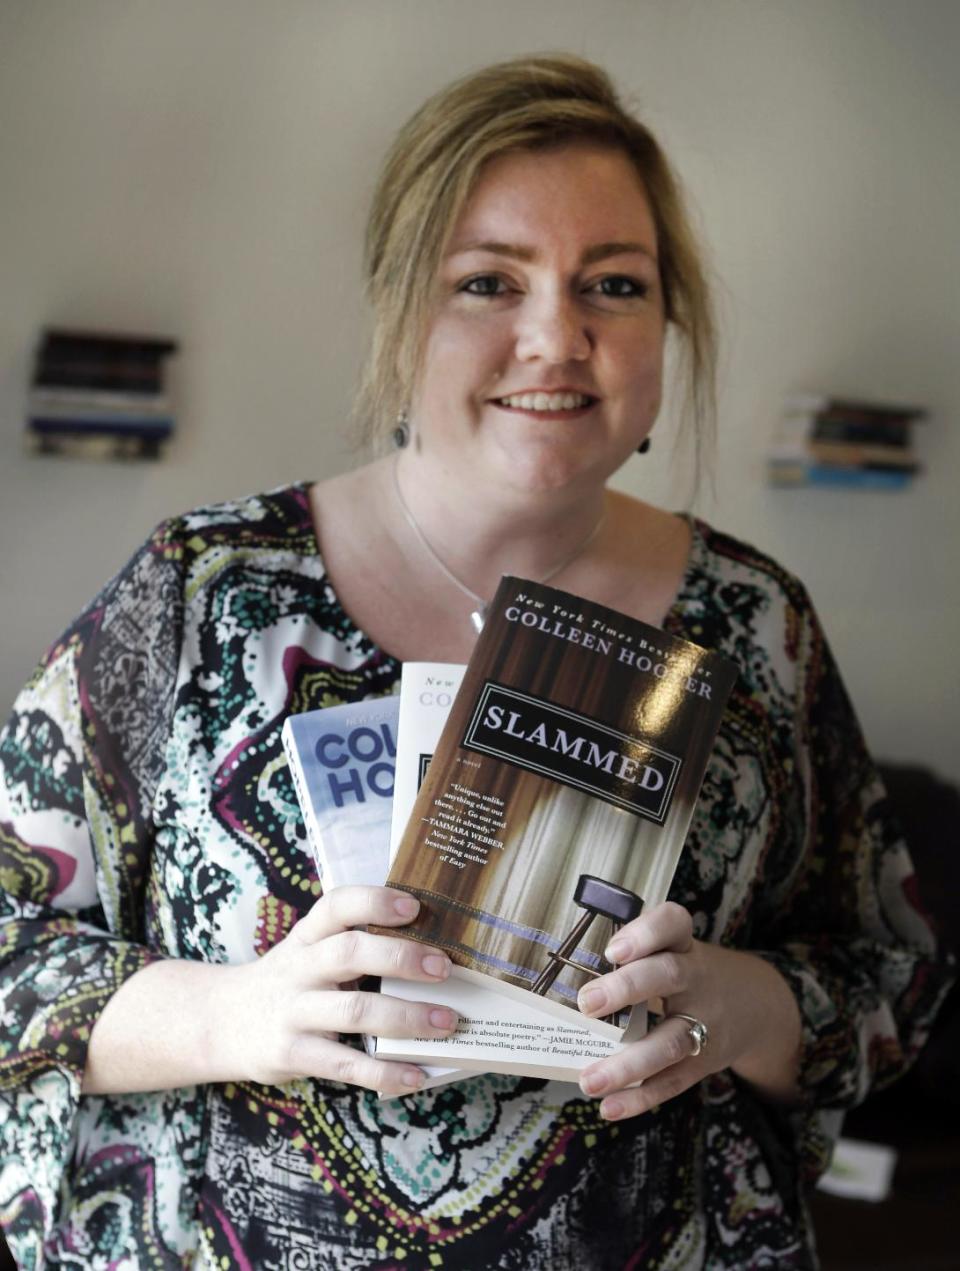 In the photo made Tuesday, Feb. 5, 2013, self publishing author Colleen Hoover posses and holds copies her books in Sulphur Springs, Texas. Hoover's romance novels books have made the New York Times bestseller list. (AP Photo/LM Otero)